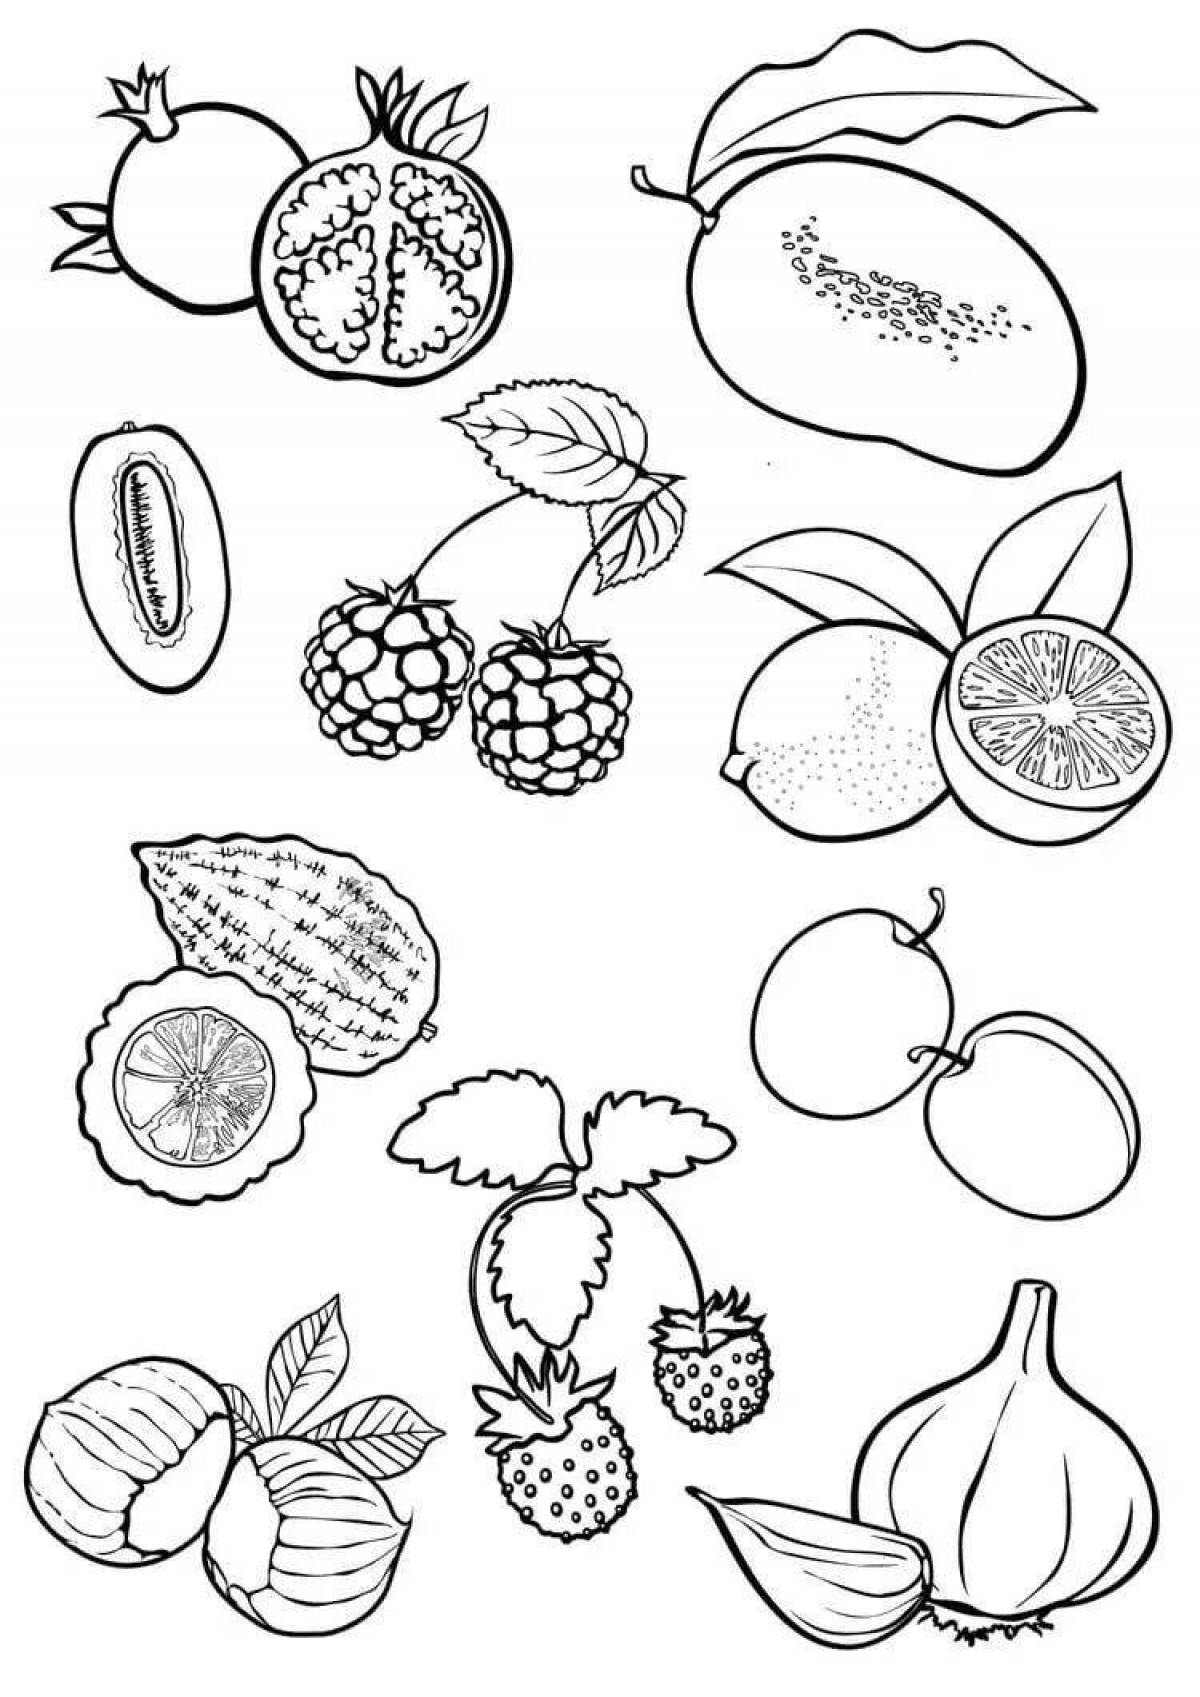 Great coconister coloring book